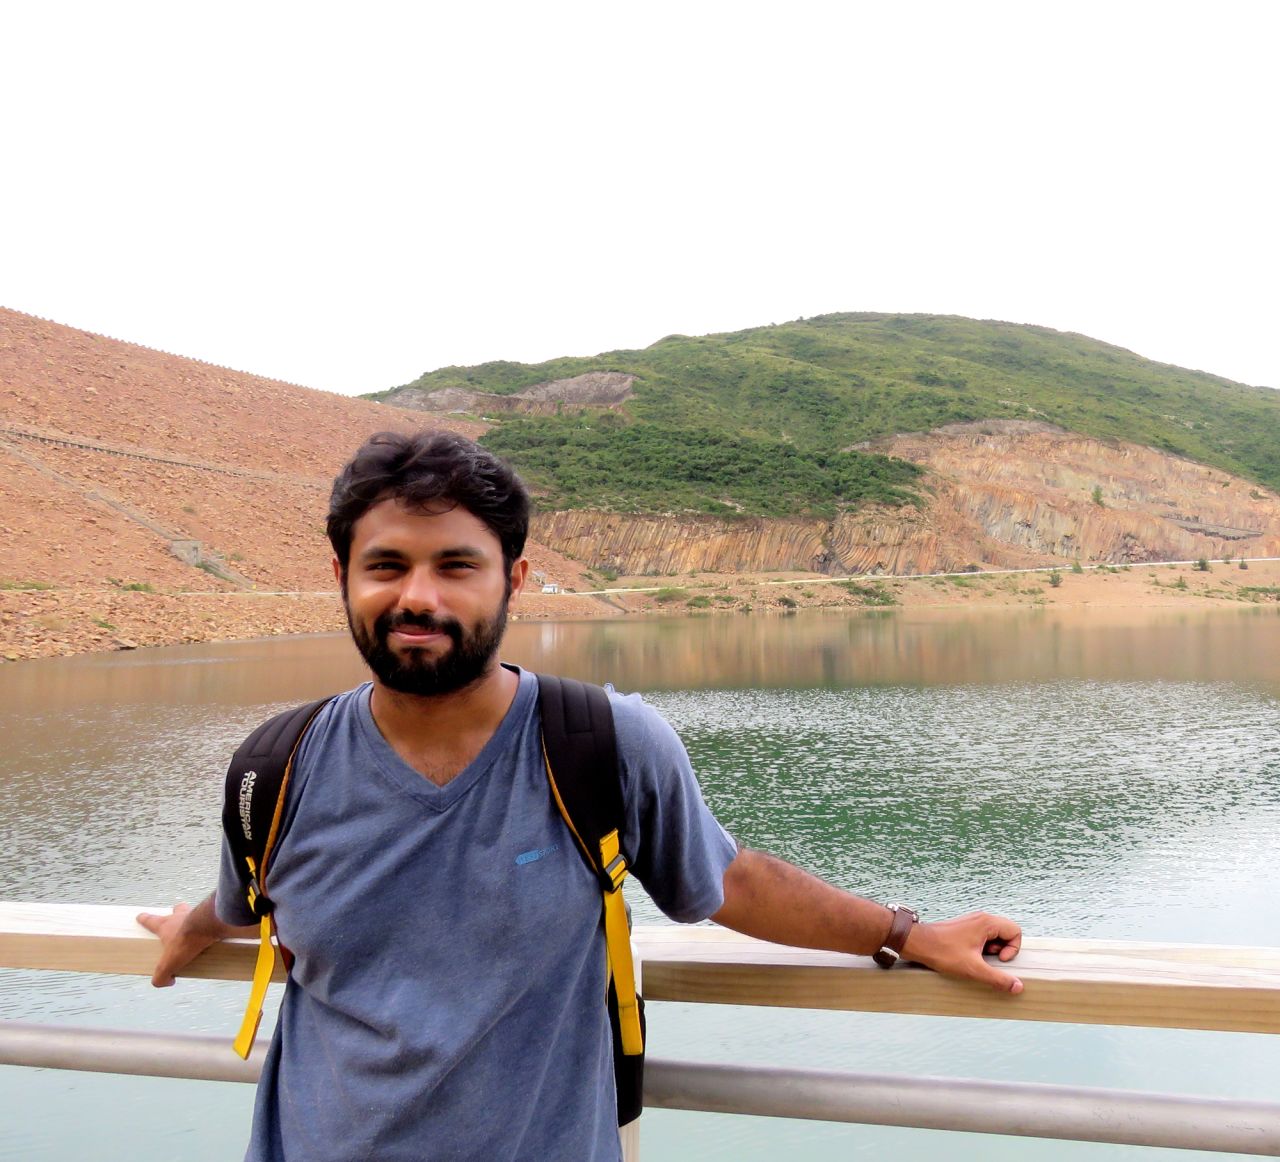 <strong>Sai Kung:</strong> Delhi-based artist Chakravarty on the Hong Kong tour, checking out Sai Kung, which is home to two country parks. The cartoonist specializes in environmental cartoons and says that since wildlife is his "muse," he wants to give back. 